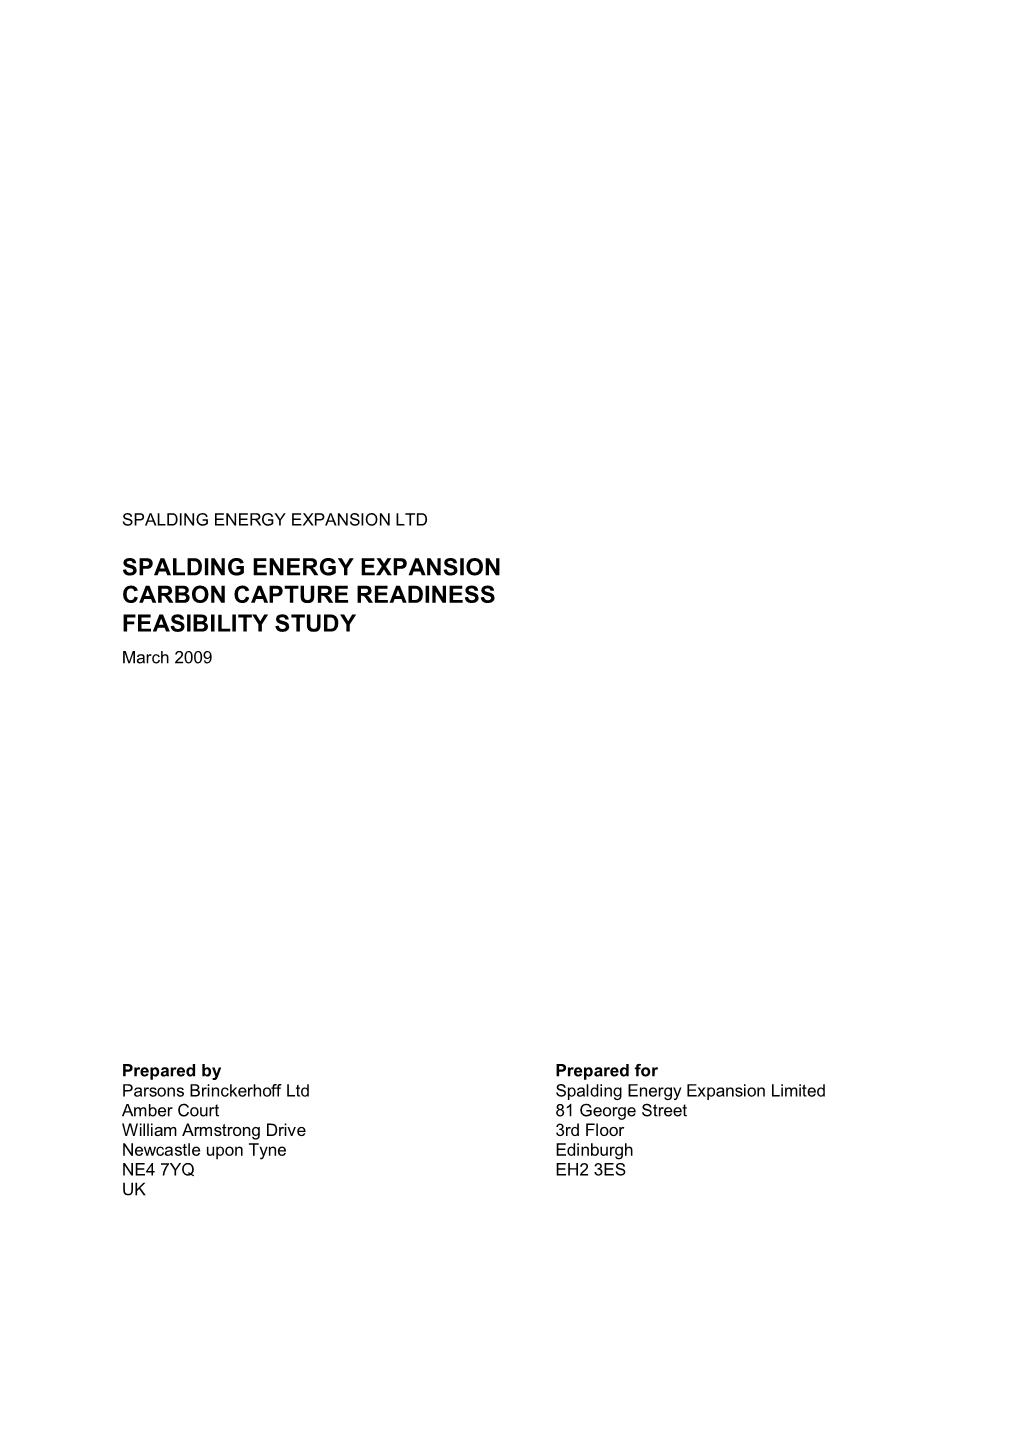 SPALDING ENERGY EXPANSION CARBON CAPTURE READINESS FEASIBILITY STUDY March 2009